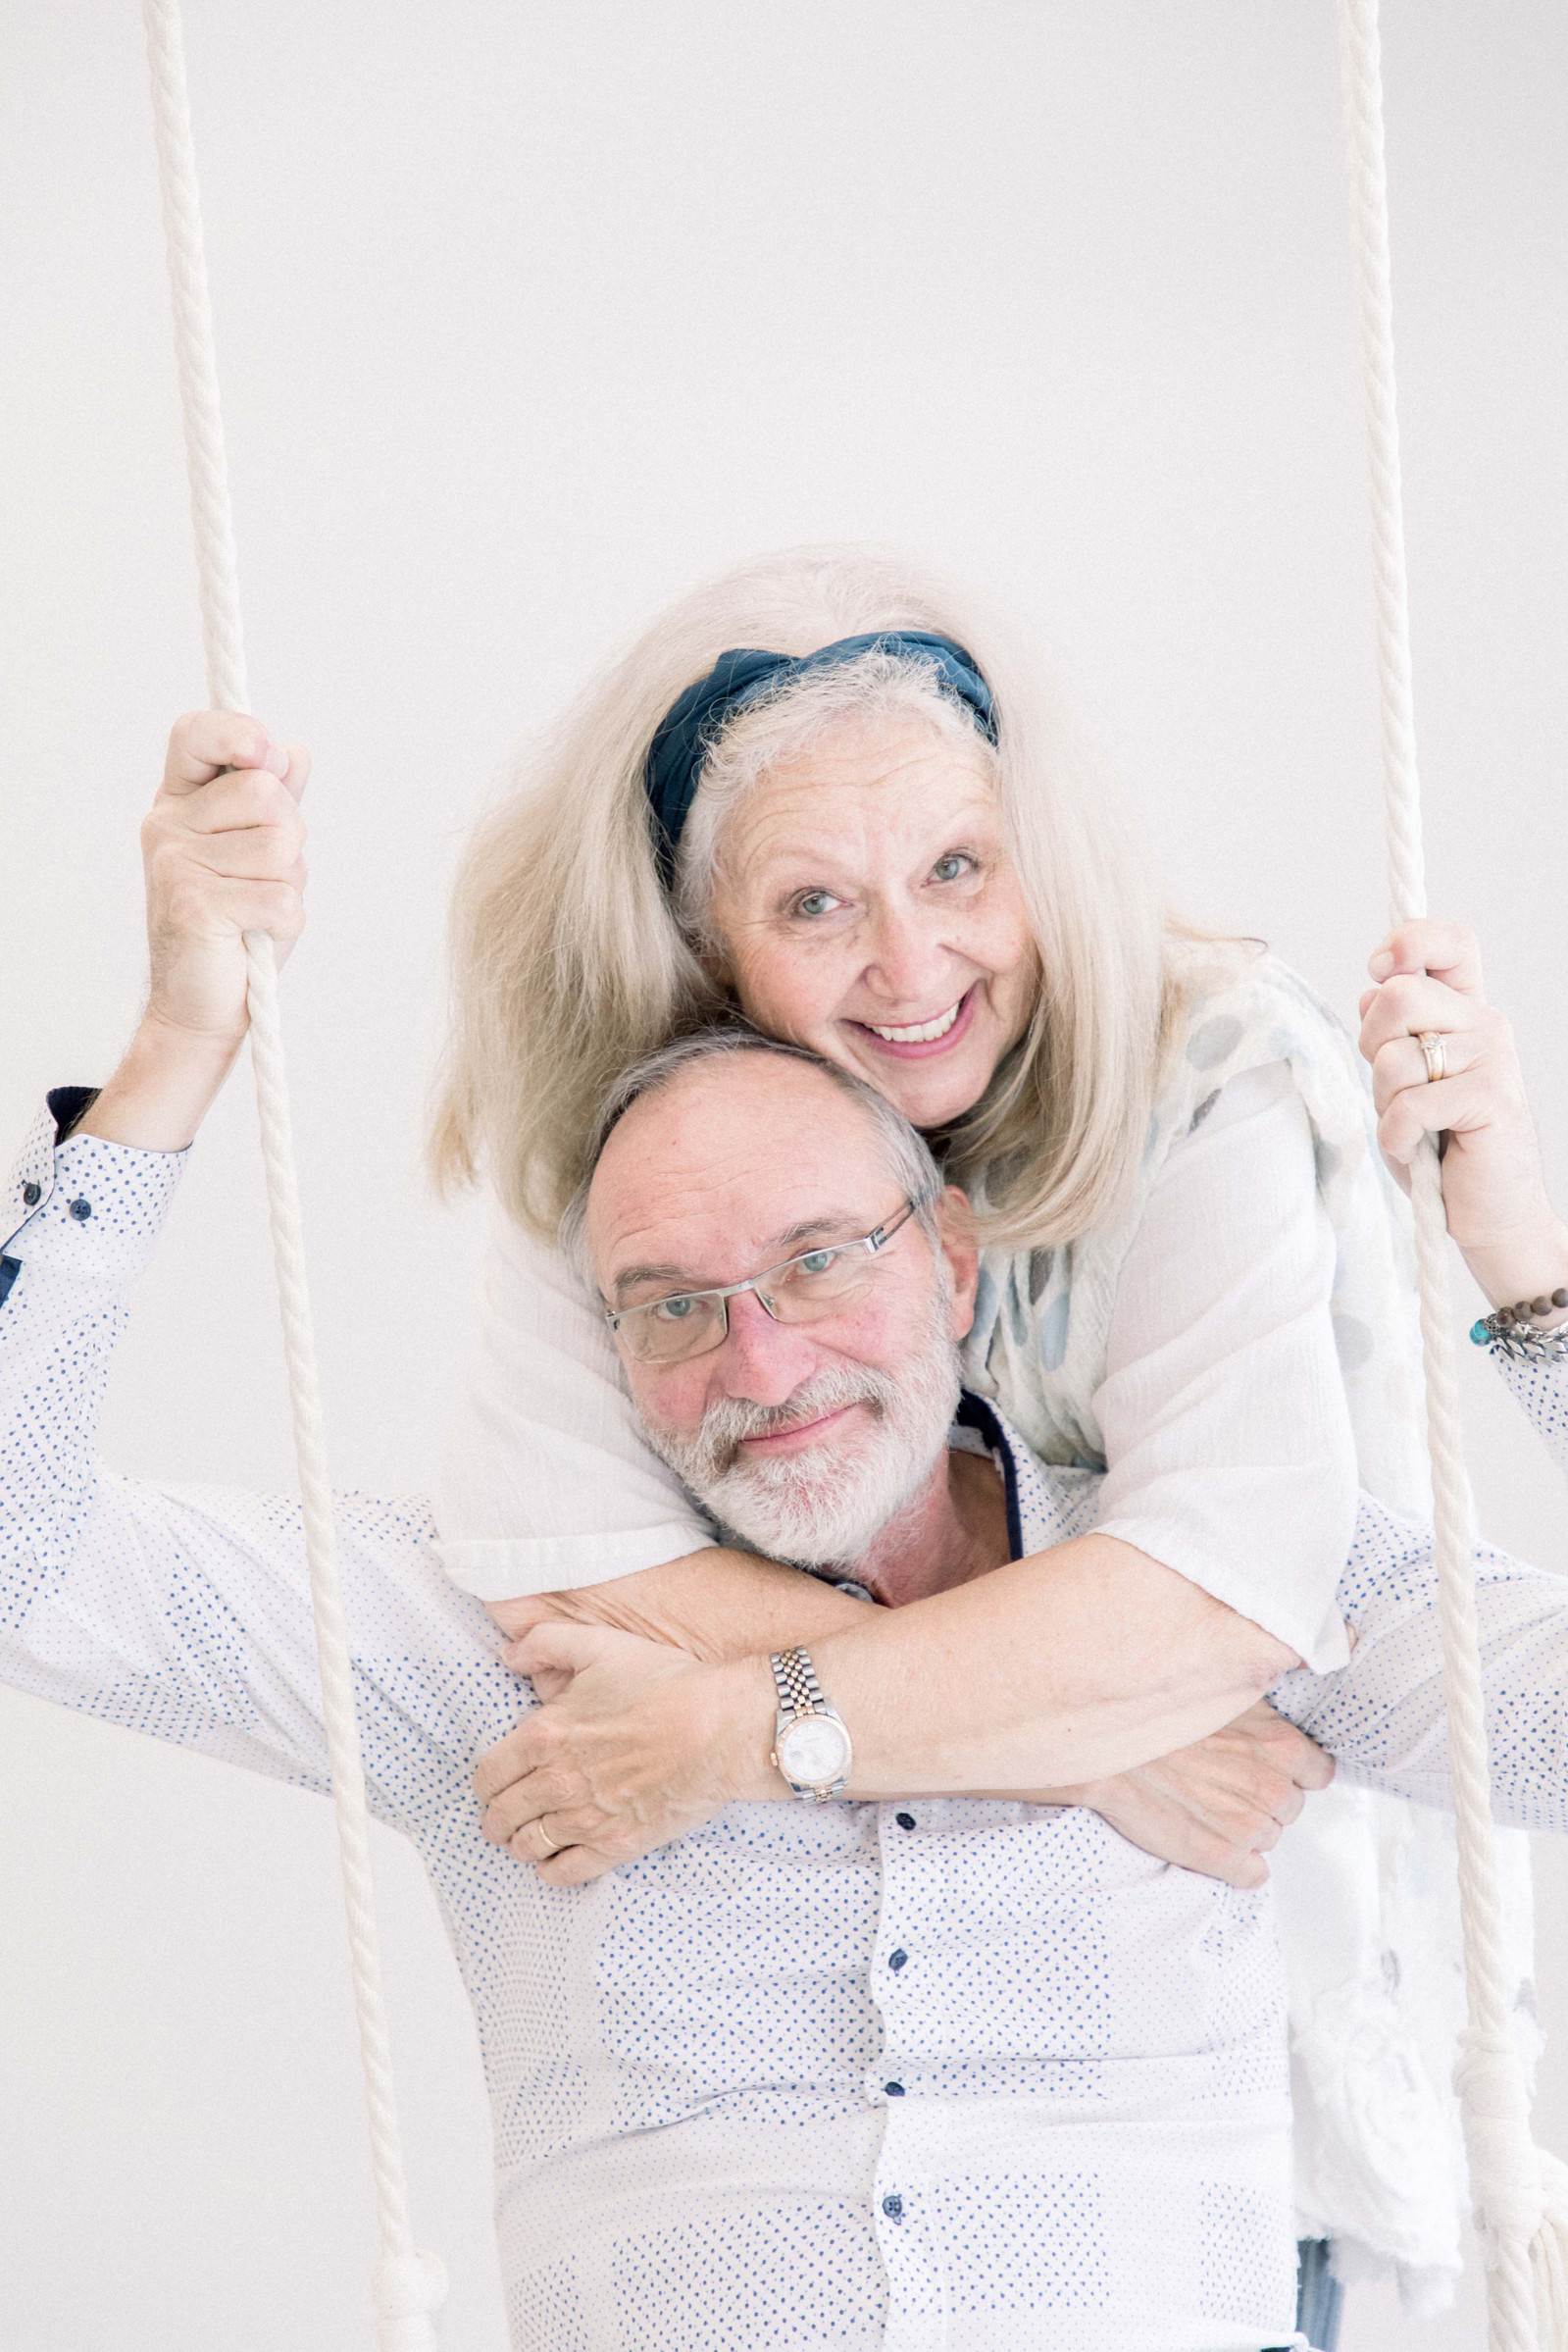 Close up portrait of man and woman hugging each other, while man sits on swing. Emily VanderBeek Photography, branding photography, portrait photography, Niagara portrait photographer, Niagara branding photographer.